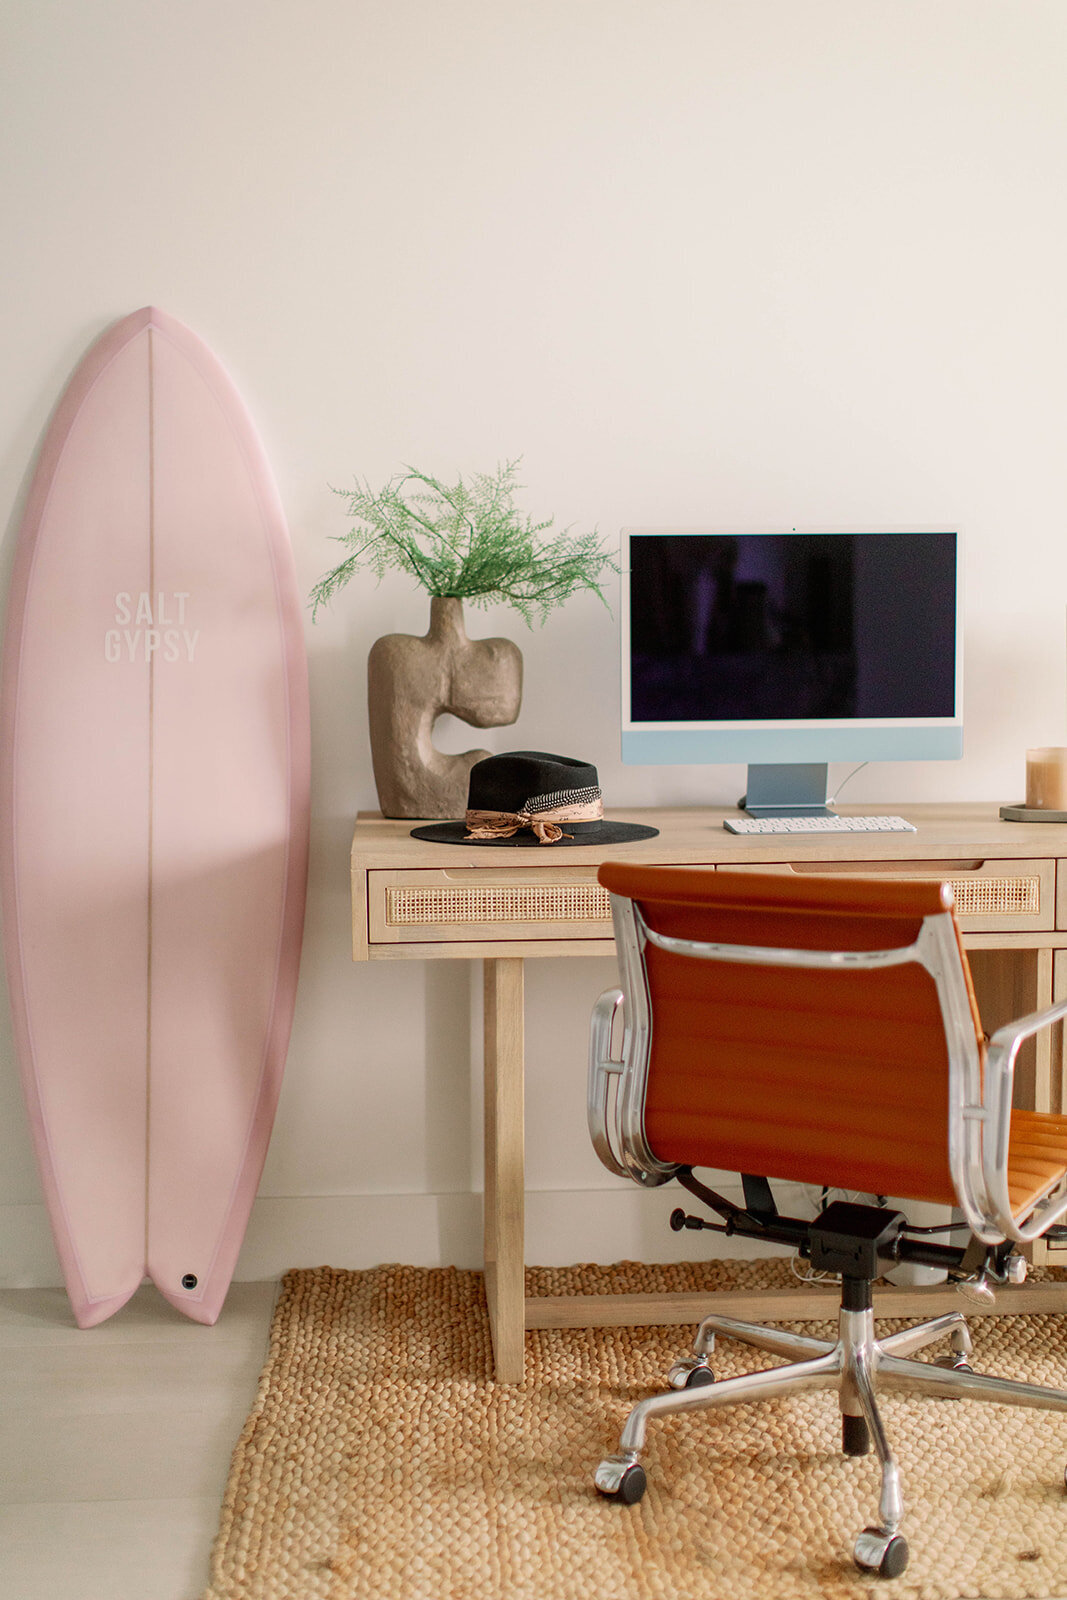 Wooden desk with leather chair and pink surf board